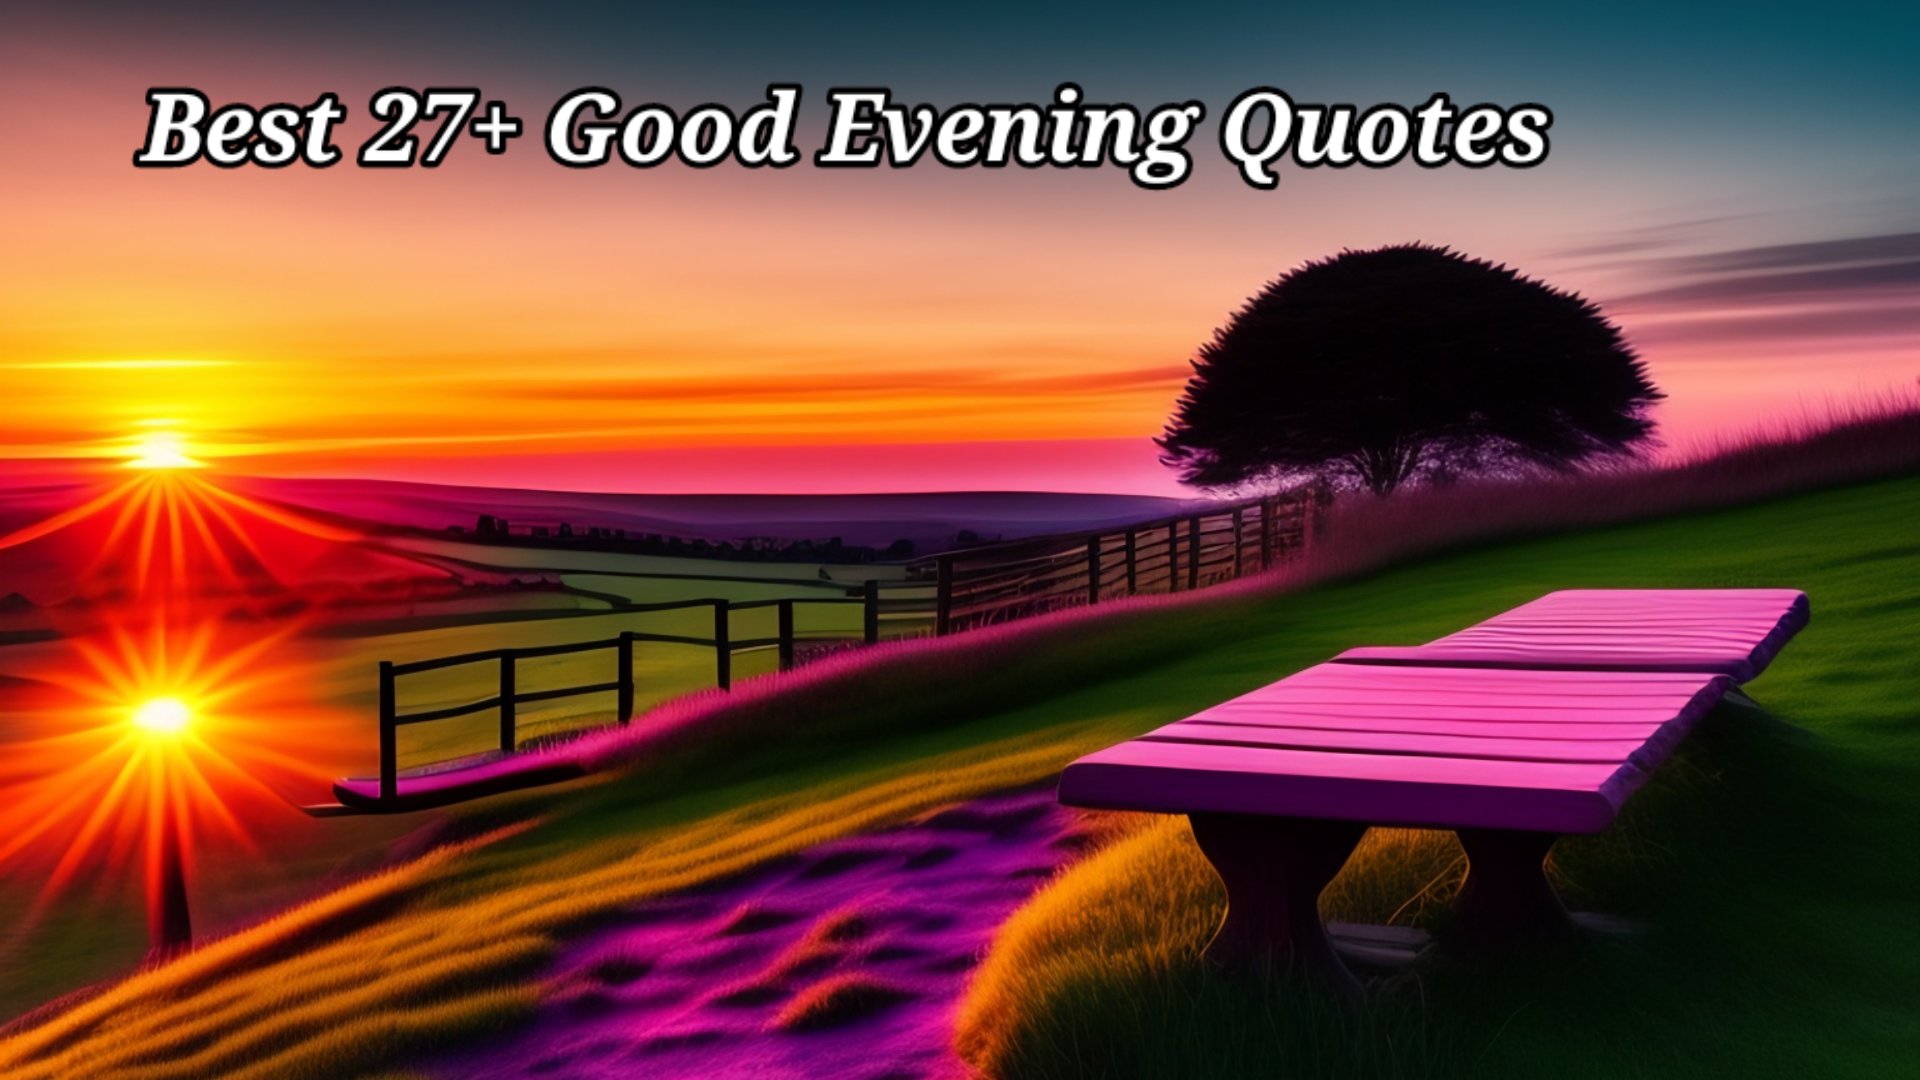 Best 27+ Good Evening Quotes to Uplift Your Spirits and Inspire a Beautiful Night